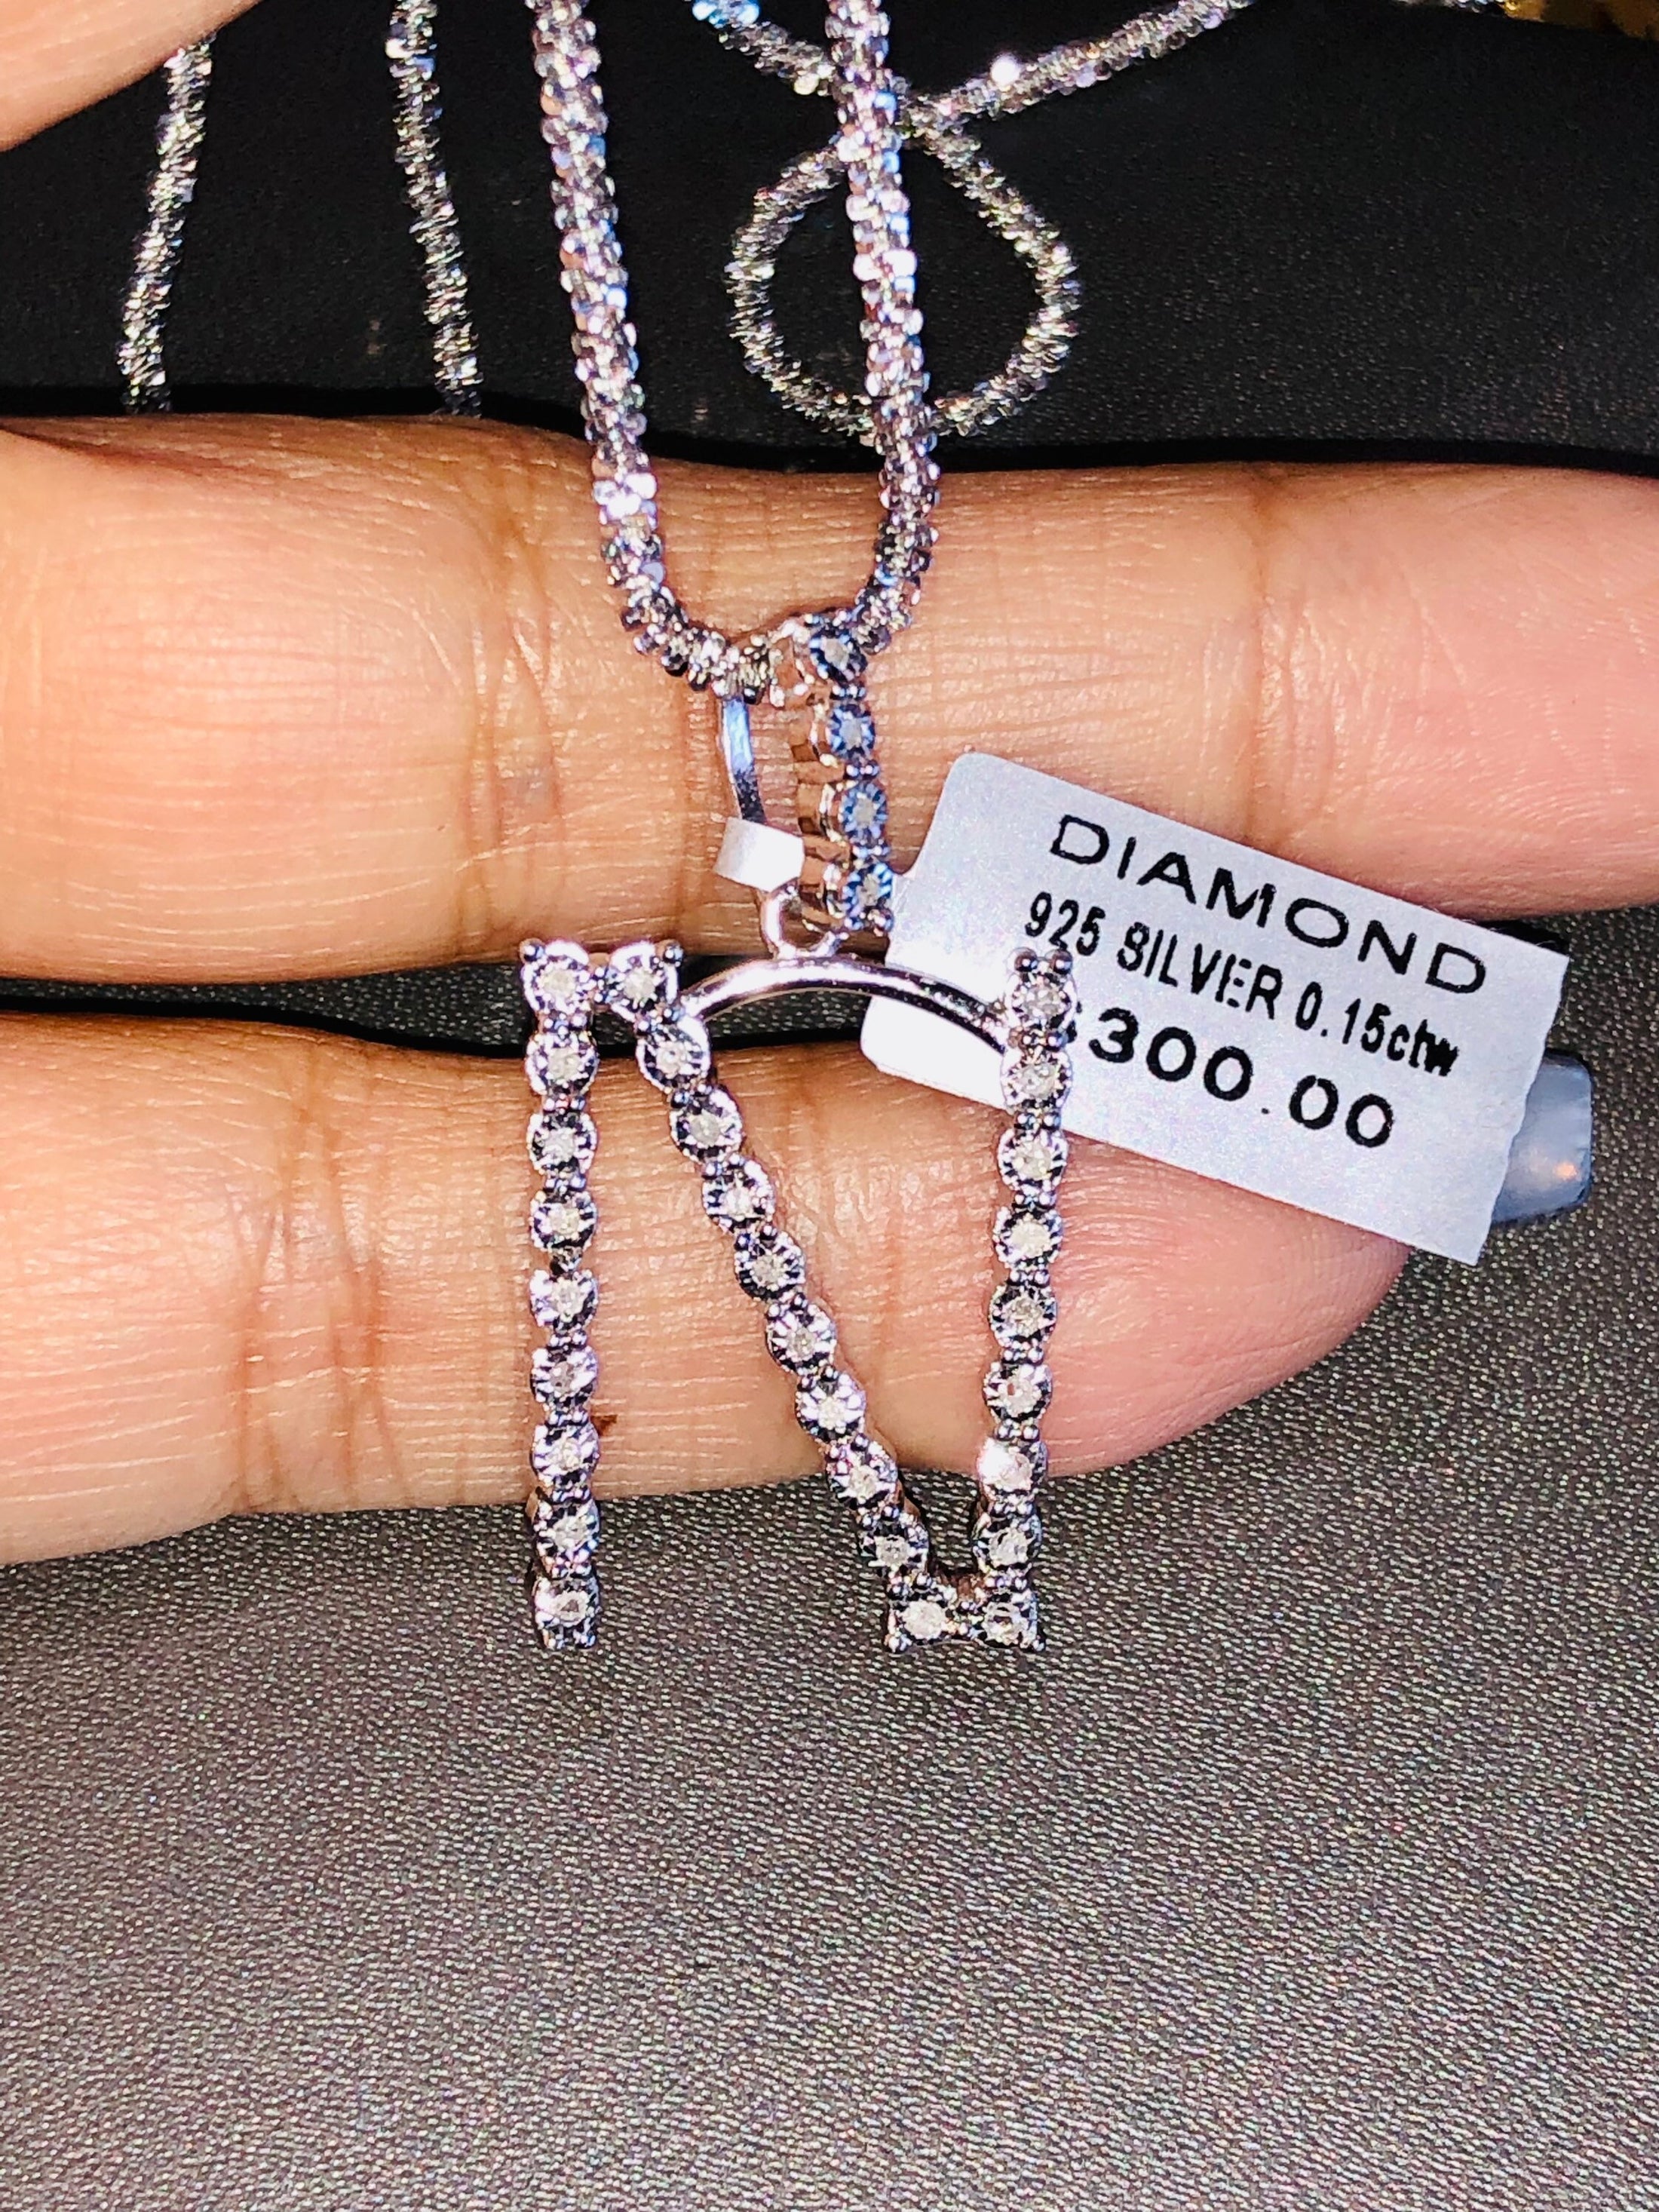 Genuine diamond Initial N a pendant w/ Turkish chain so sparkly so beautiful custom hand crafted 100% Real Diamonds not CZ not moissanite!